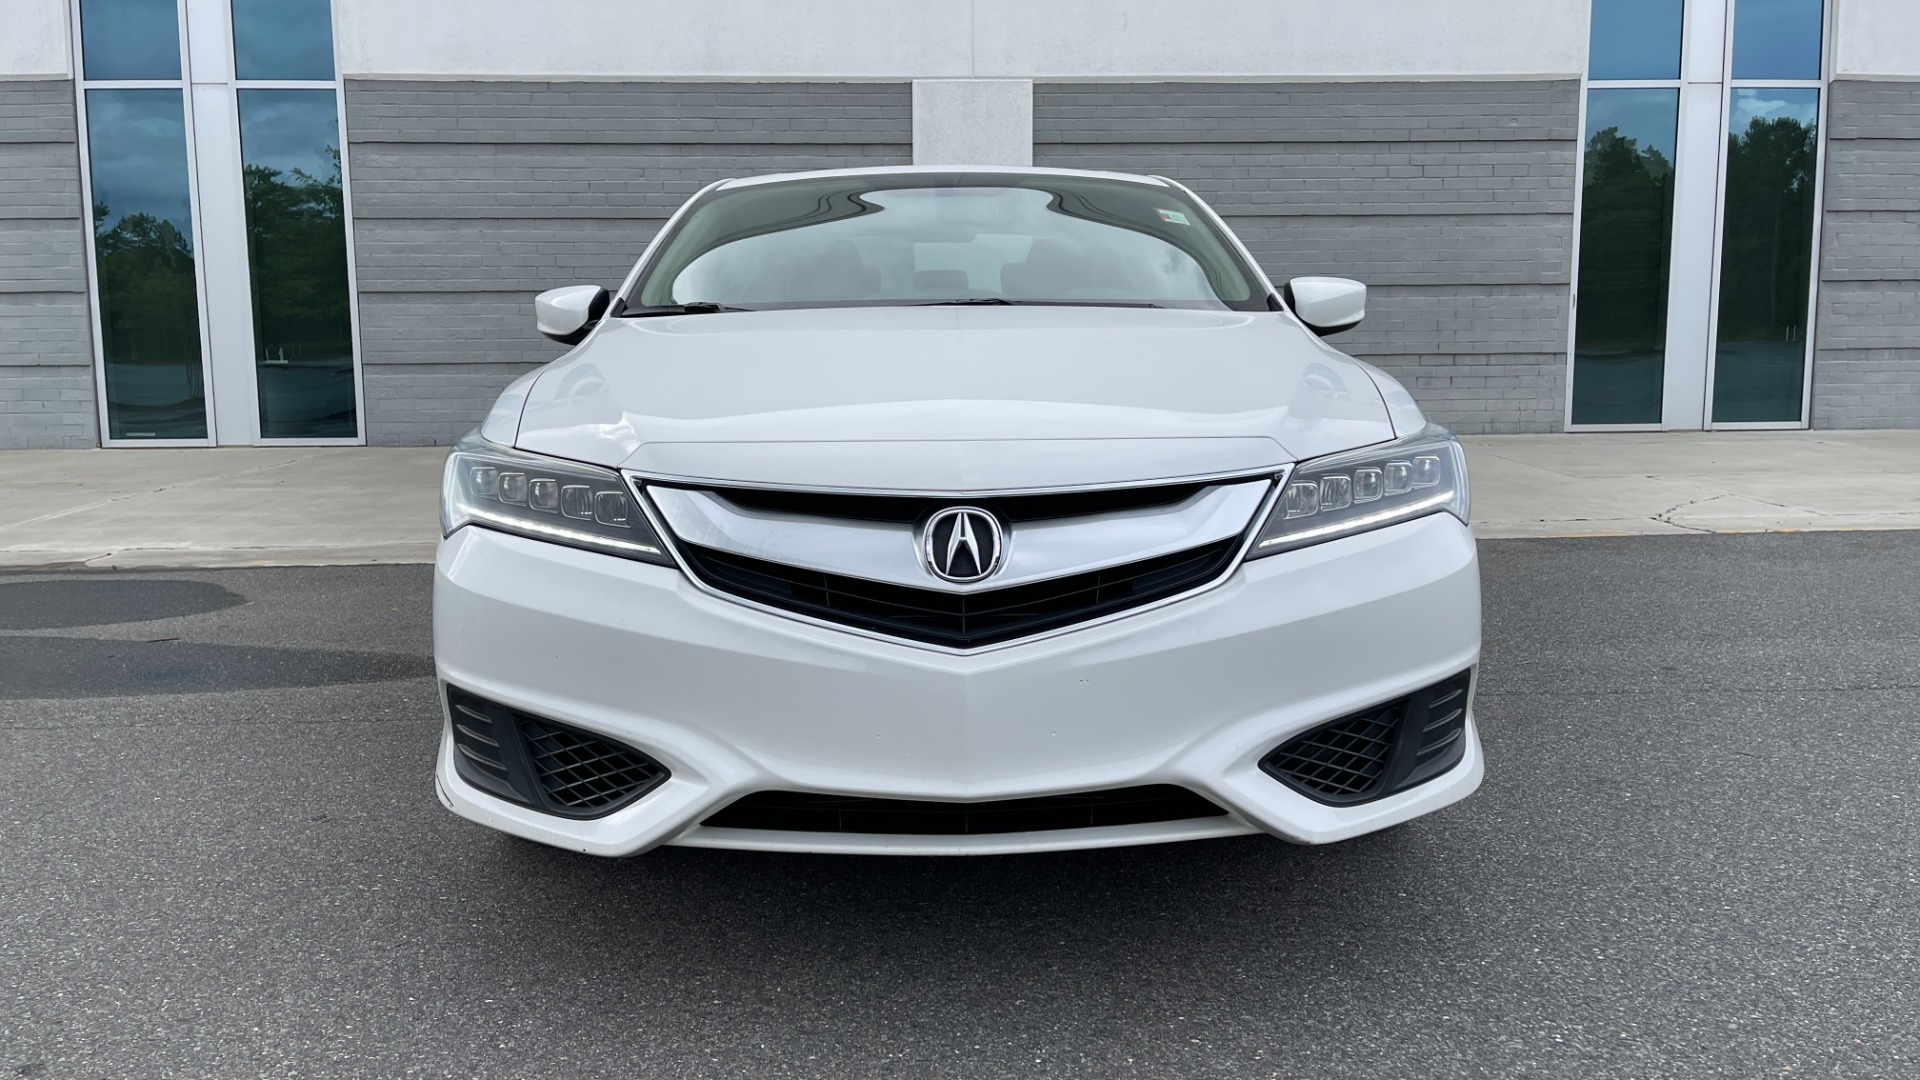 Used 2016 Acura ILX 4DR SEDAN / 2.4L I4 / FWD / STREAMING AUDIO / SUNROOF / REARVIEW for sale Sold at Formula Imports in Charlotte NC 28227 11